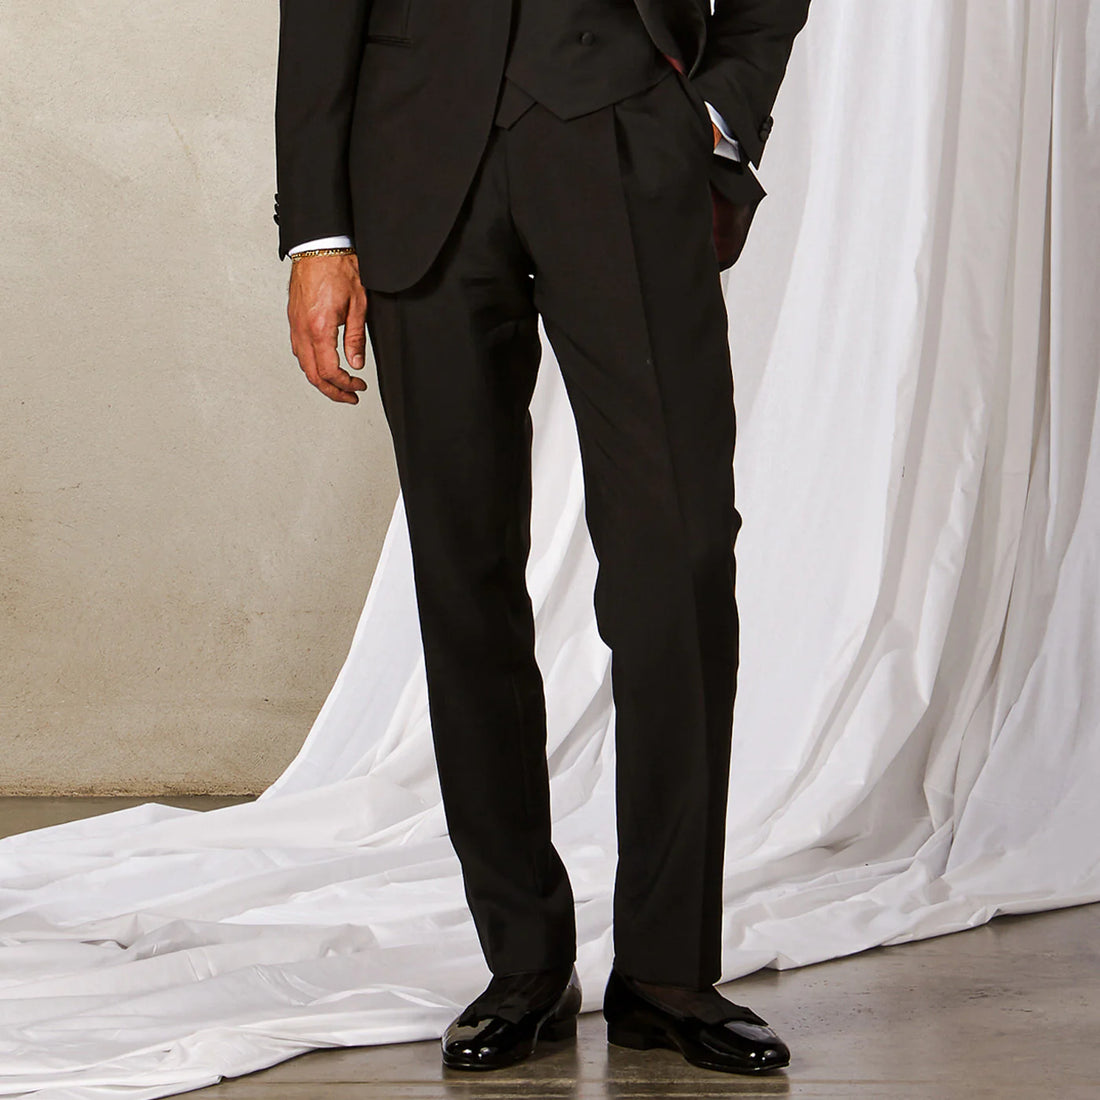 A person in a black suit and shiny shoes stands beside a white draped fabric.